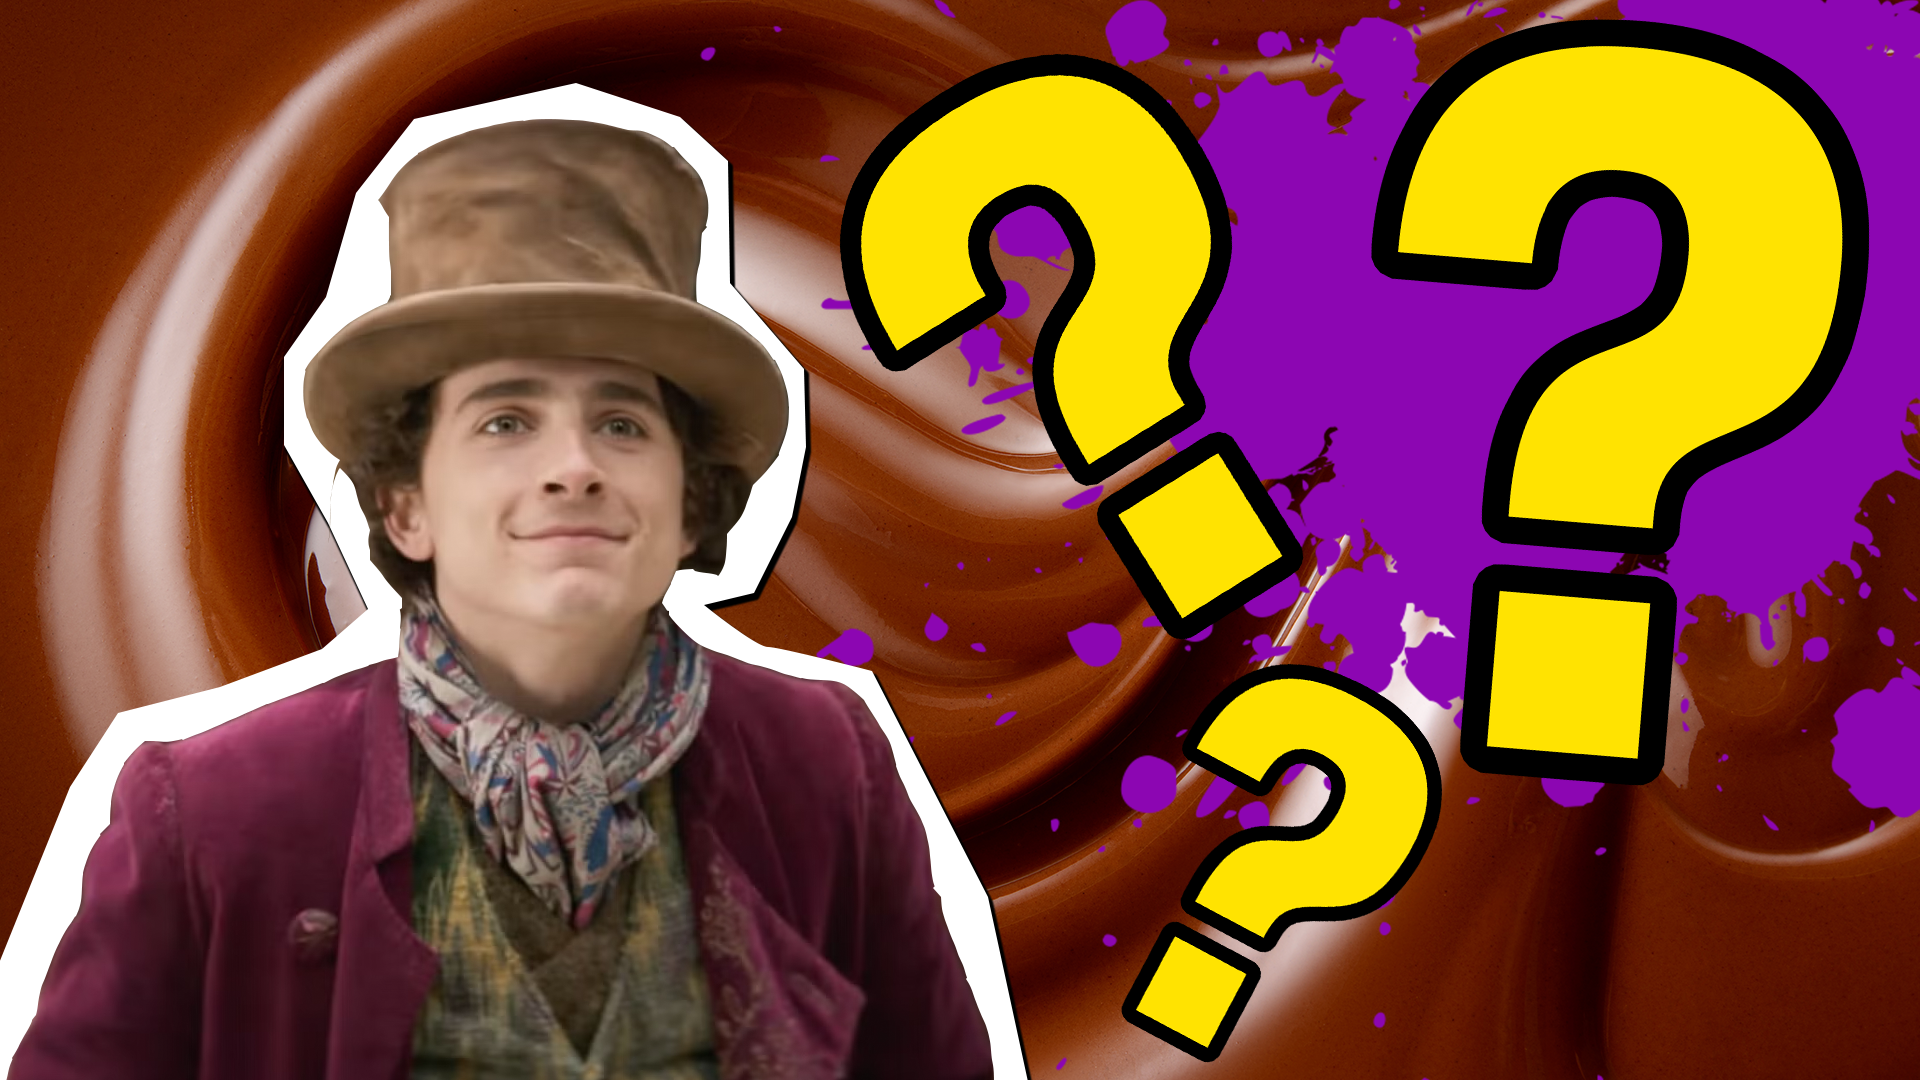 30 Surprising Facts About 'Willy Wonka & the Chocolate Factory